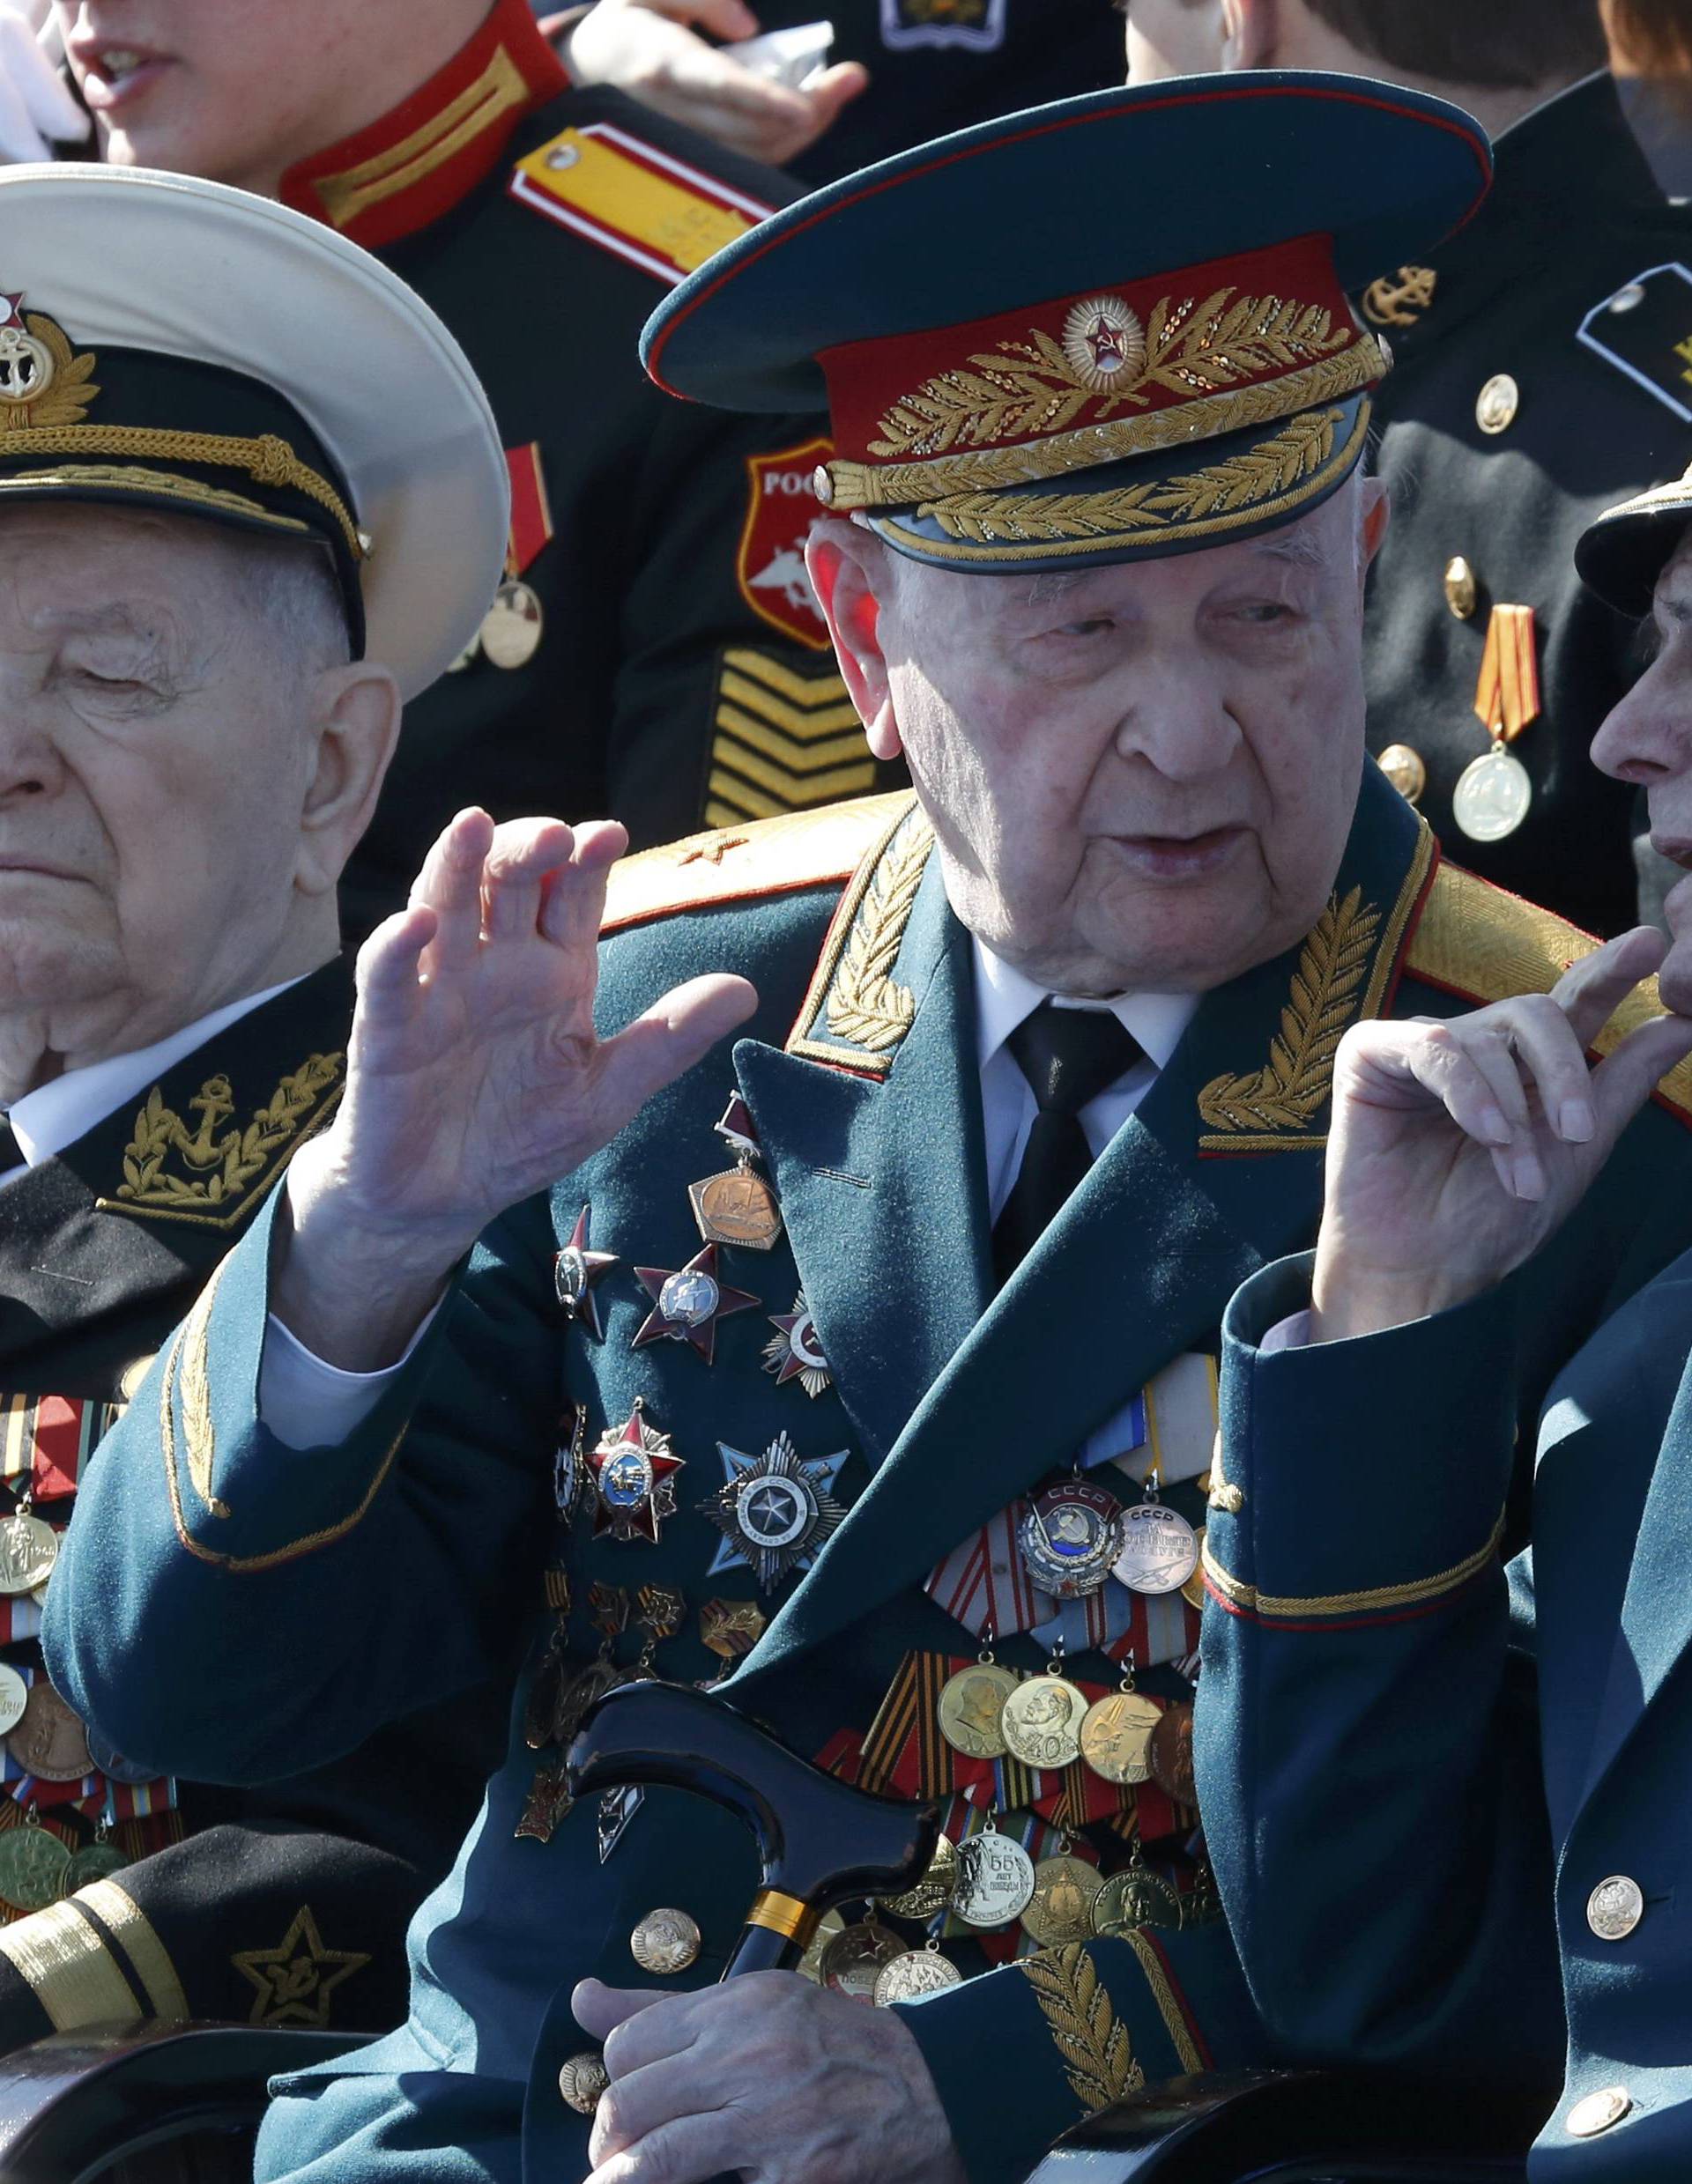 World War Two veterans wait before watching Victory Day parade to mark end of World War Two at Red Square in Moscow